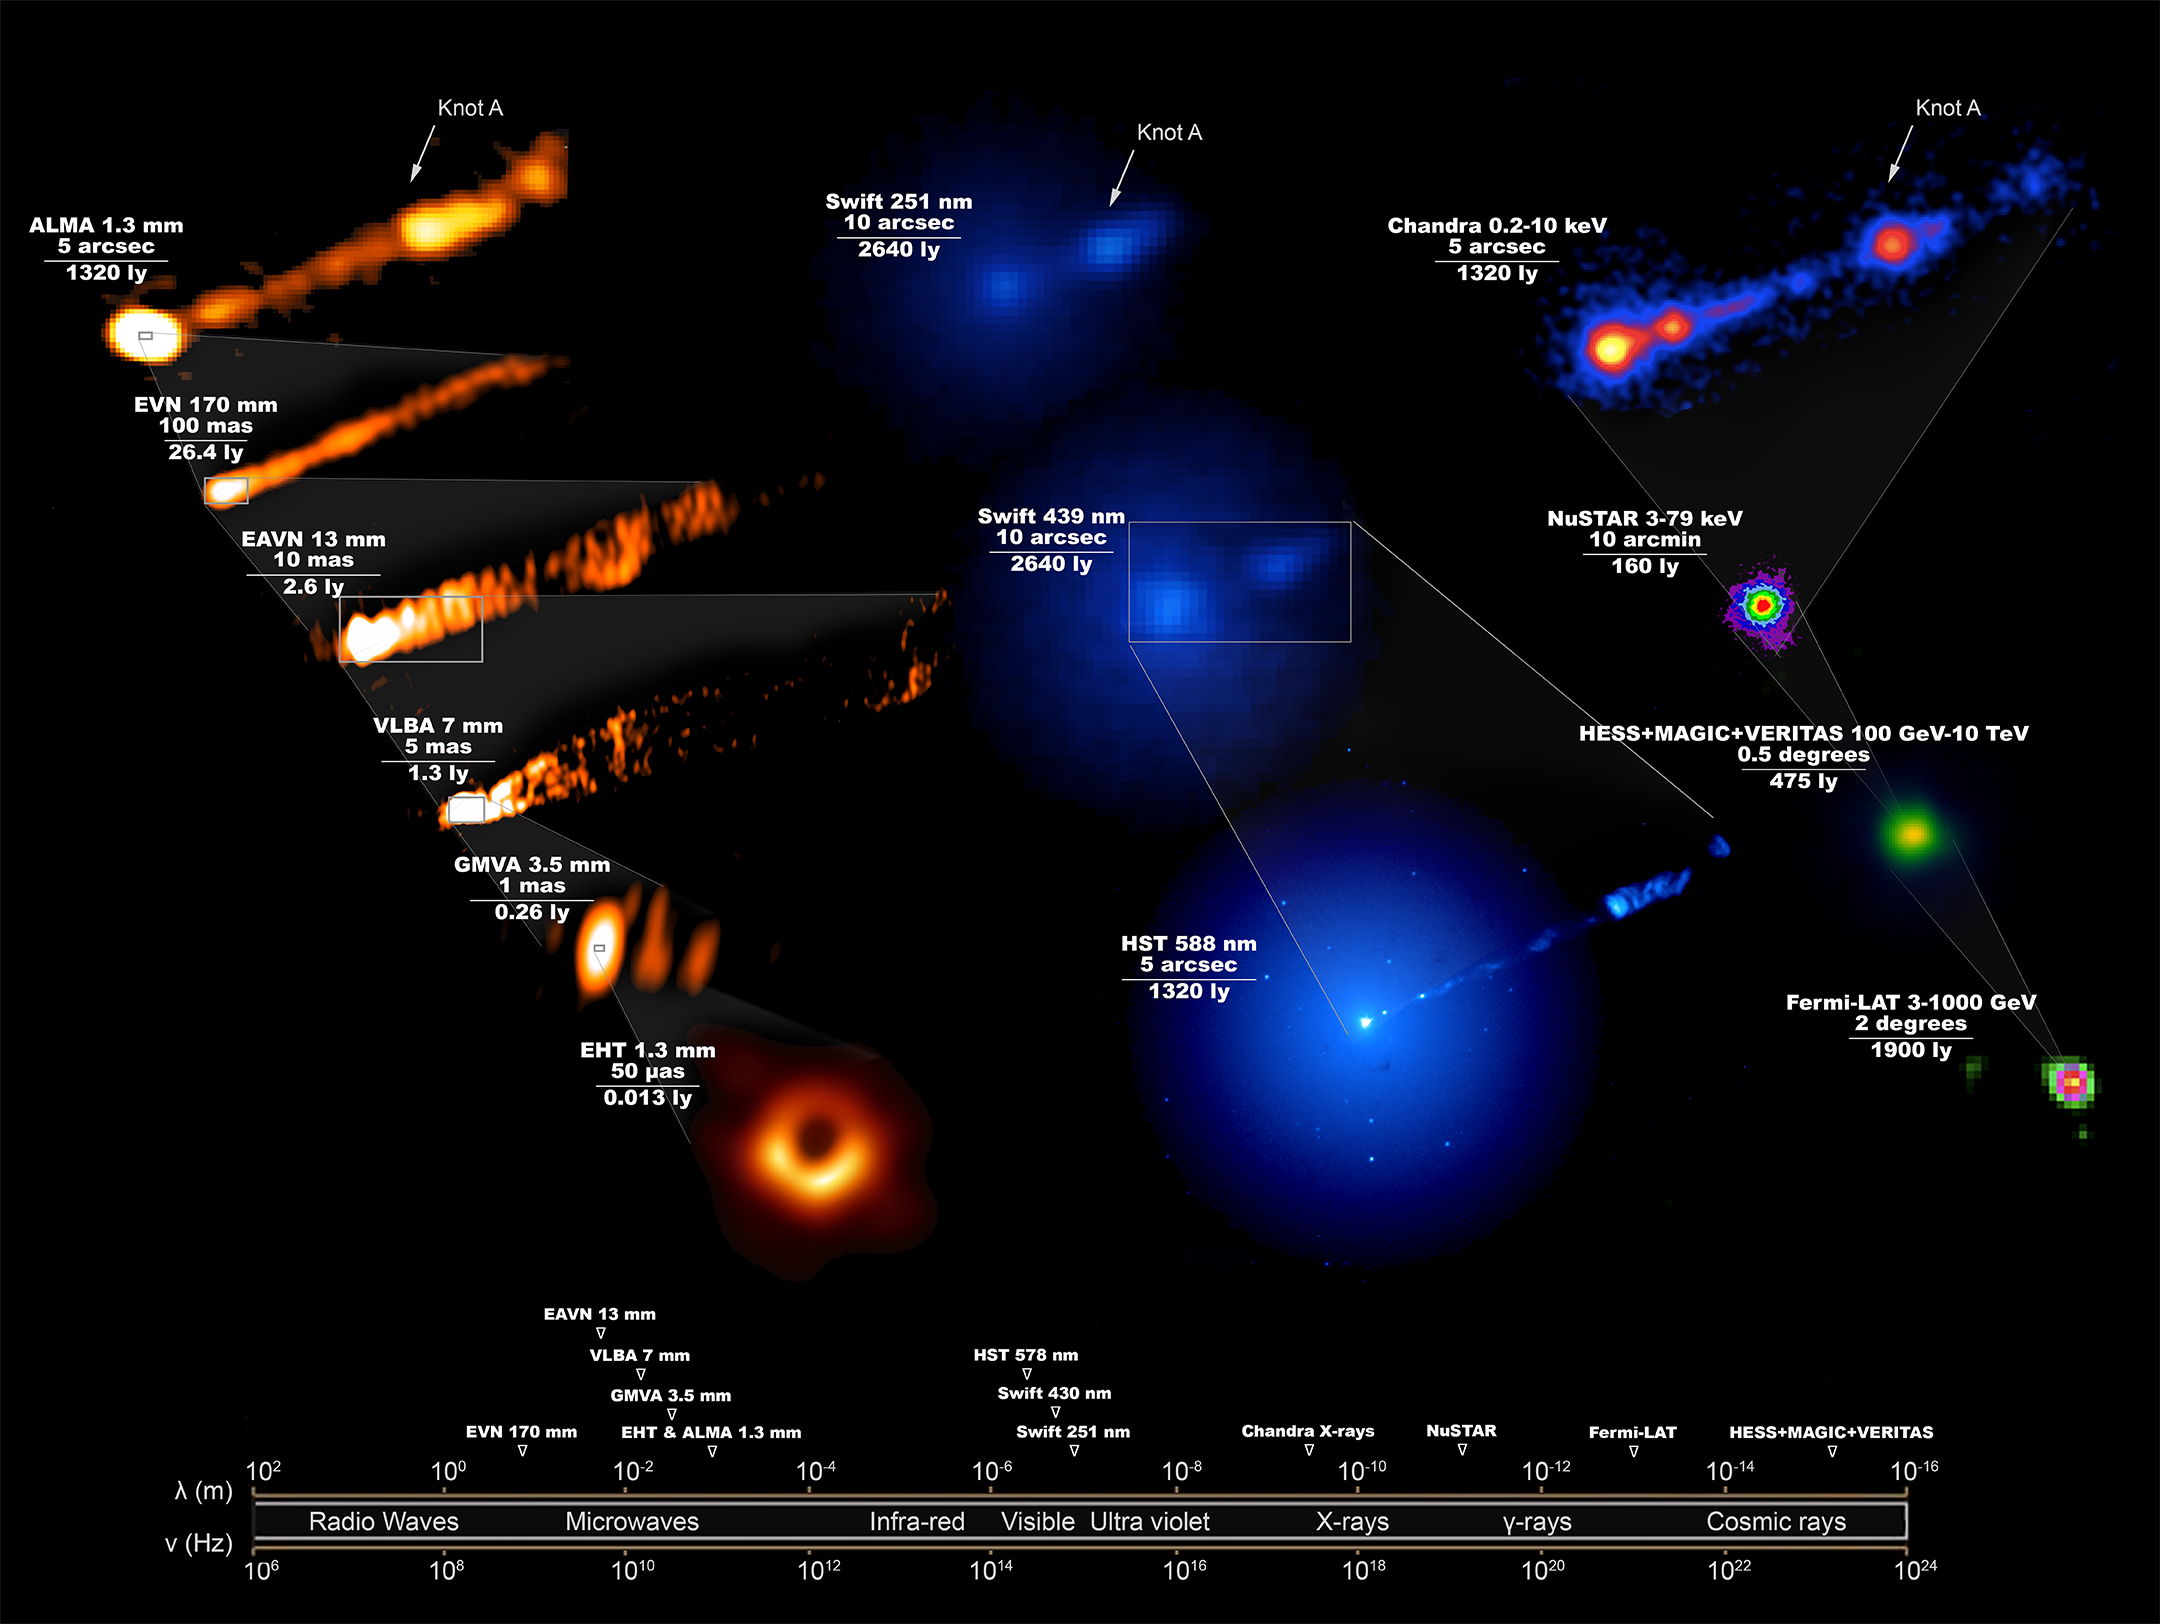 In April 2019, the Event Horizon Telescope project released the first direct image of a black hole in the galaxy M87. This series of images represent an extensive observing campaign by telescopes around the globe and in space of M87's black hole and the region around it. These telescopes cover the entire spectrum of light from radio waves to gamma rays. The images also range in scale from a fraction of a light year to hundreds of thousands of light years. These combined data will help scientists gain crucial insight into the black hole's properties.